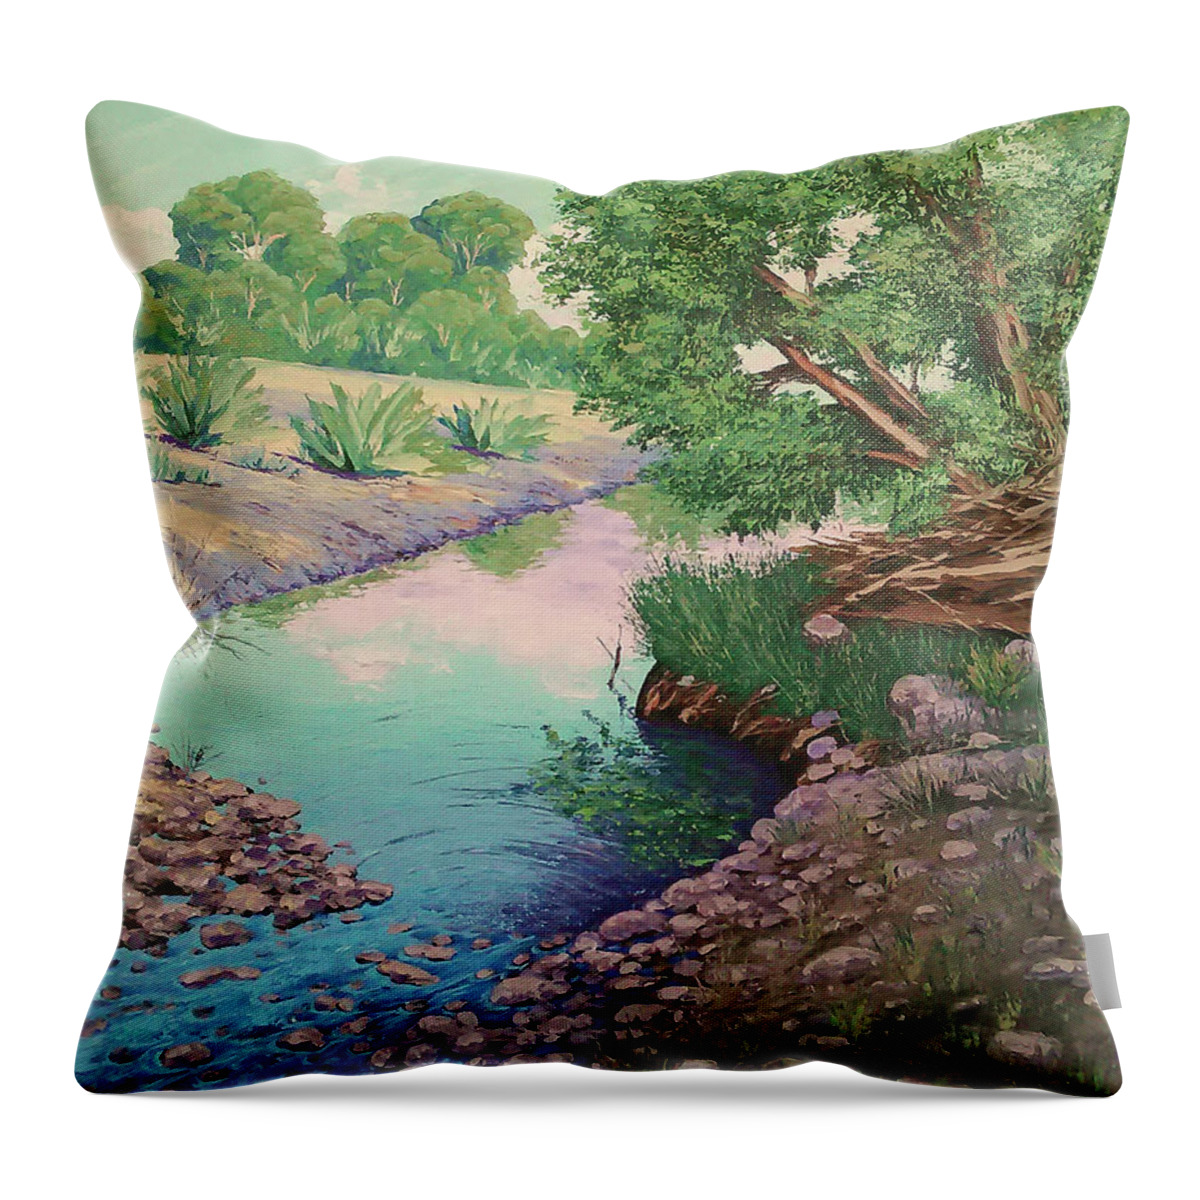 Tonto National Forest Throw Pillow featuring the painting Tonto Creek by Cheryl Fecht